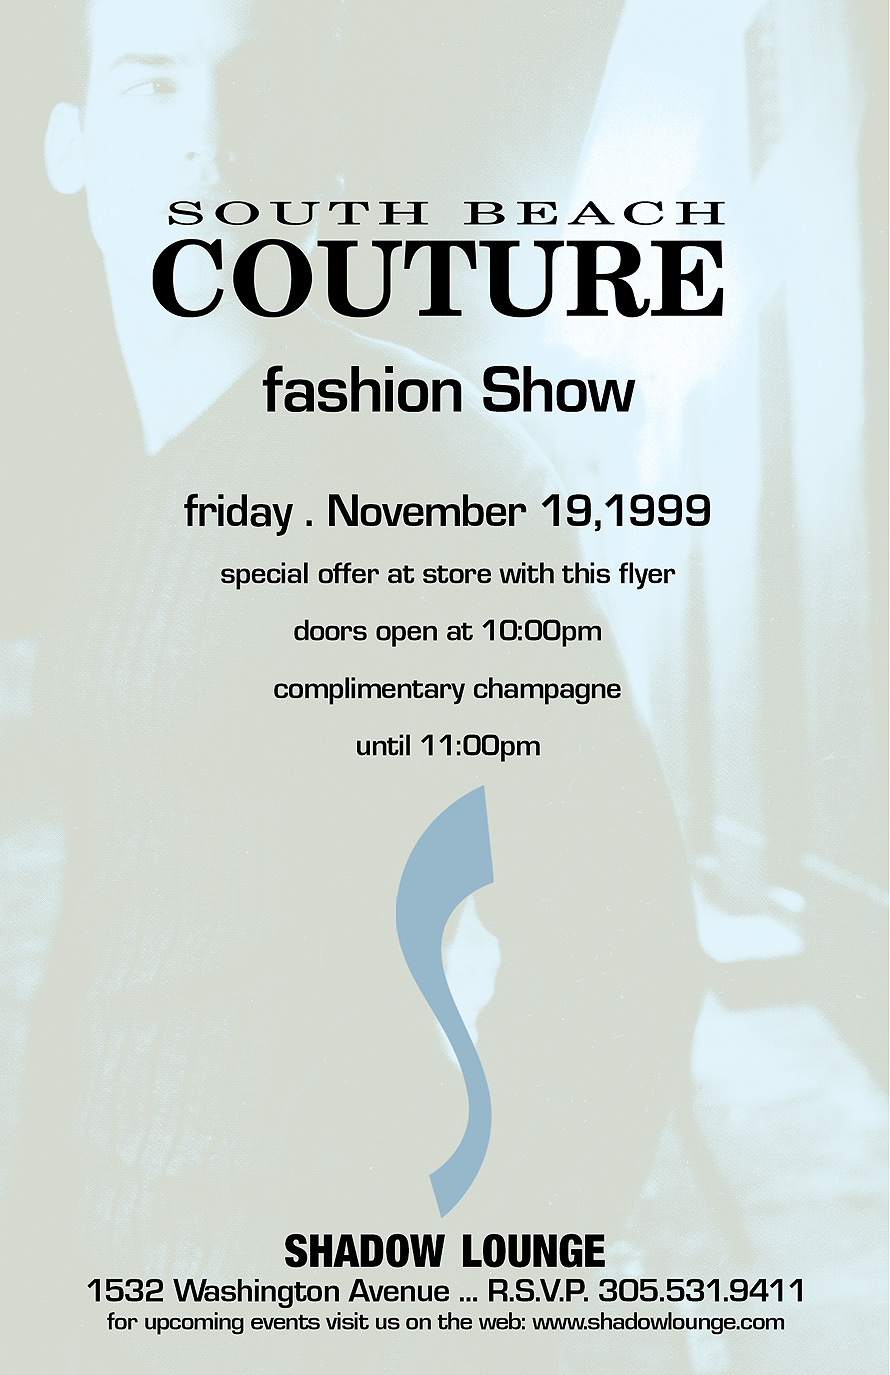 South Beach Couture Fashion Show at Shadow Lounge